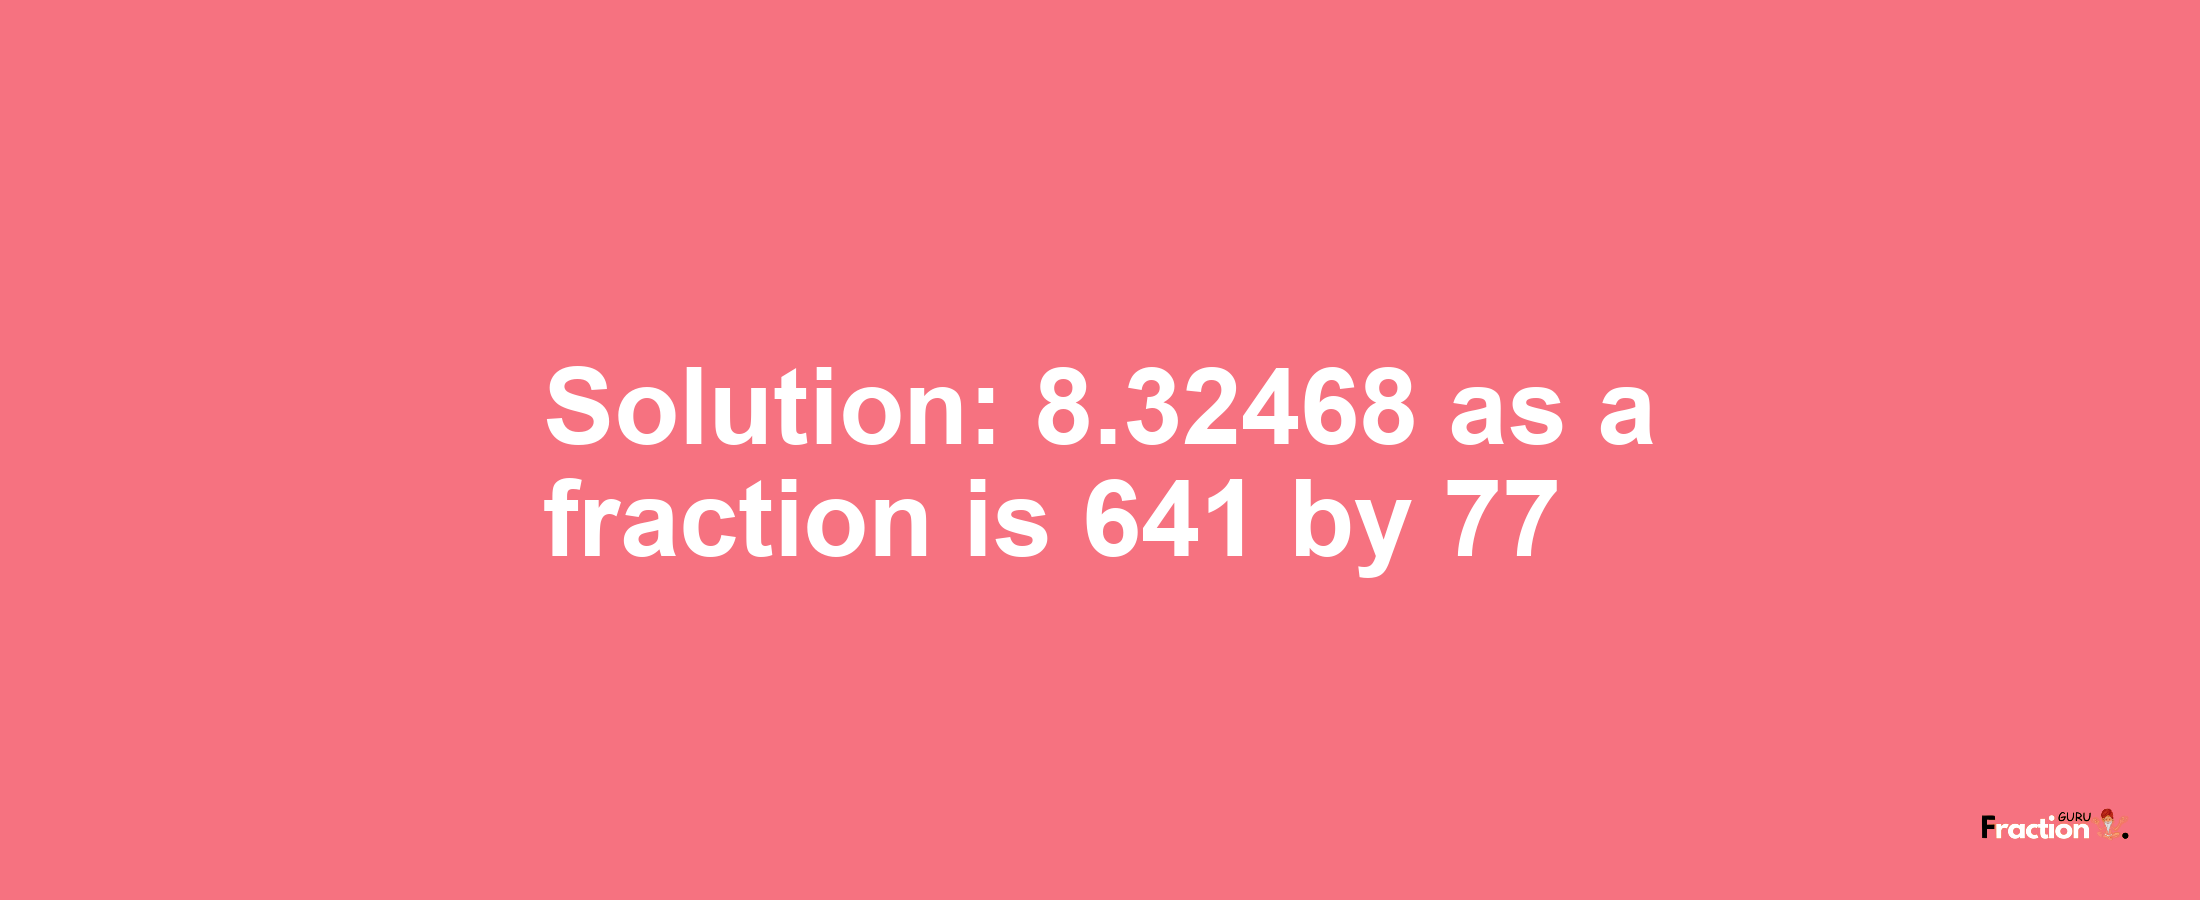 Solution:8.32468 as a fraction is 641/77